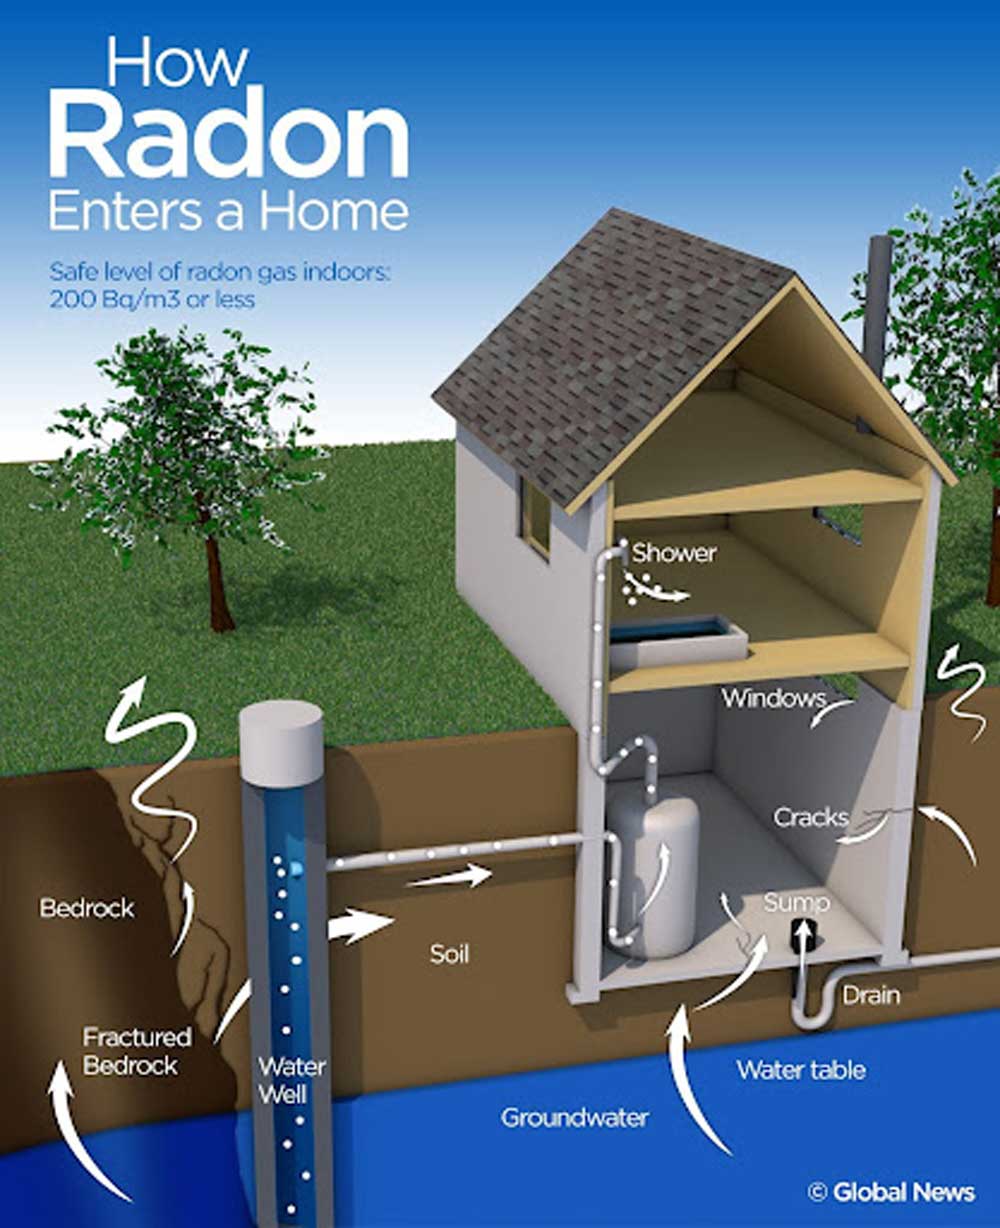 Diagram of how radon enters home from the ground, through the water and windows.